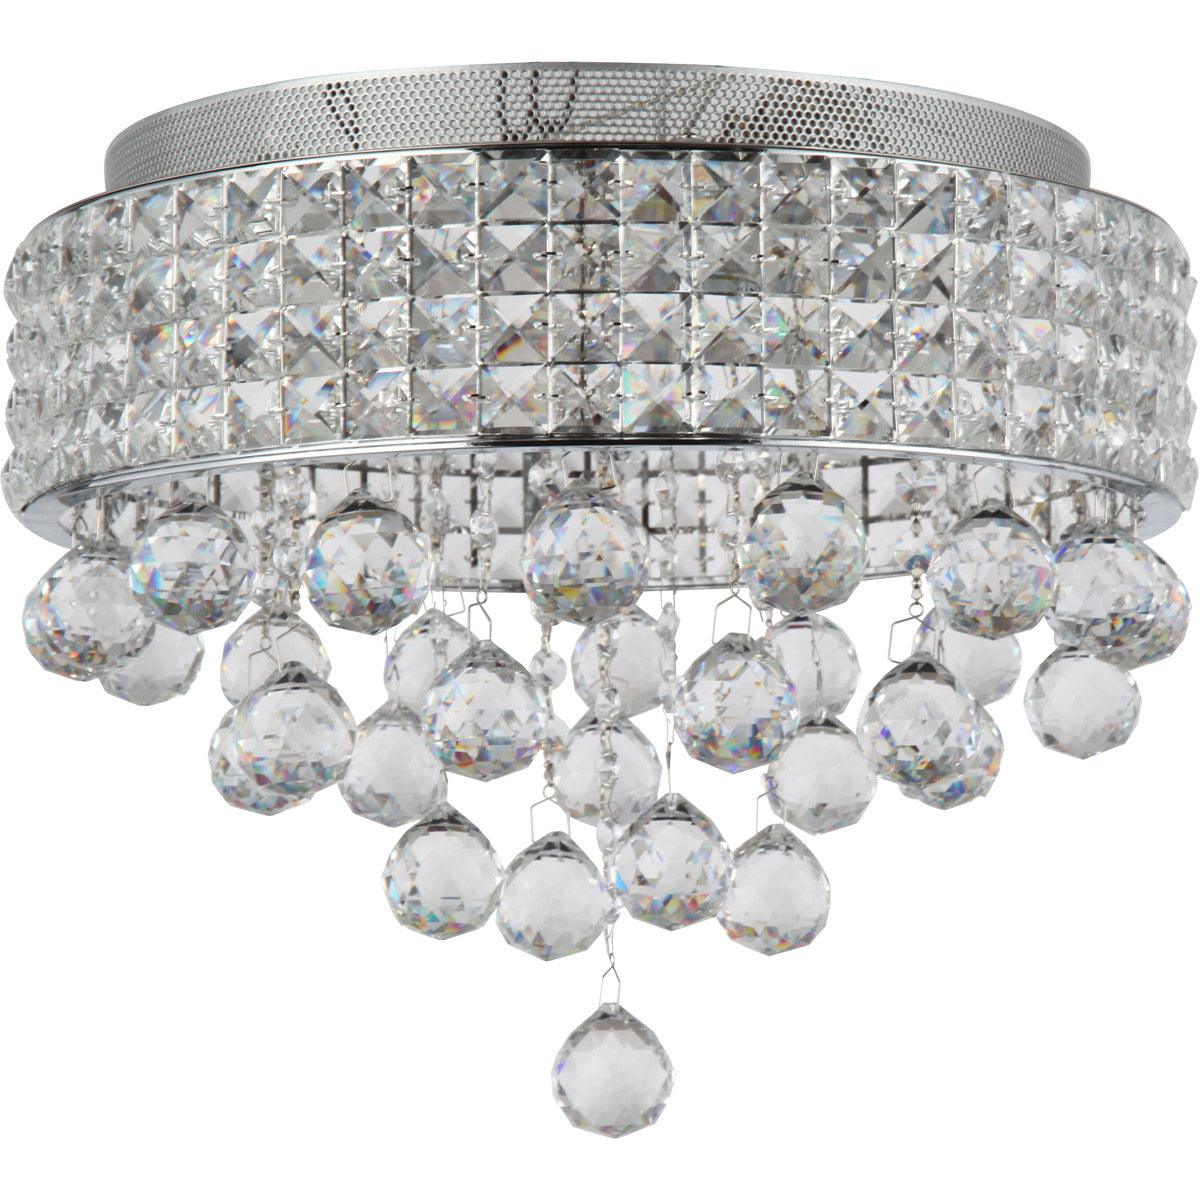 Chrome Round Frame with Clear Crystal Flush Mount - LV LIGHTING